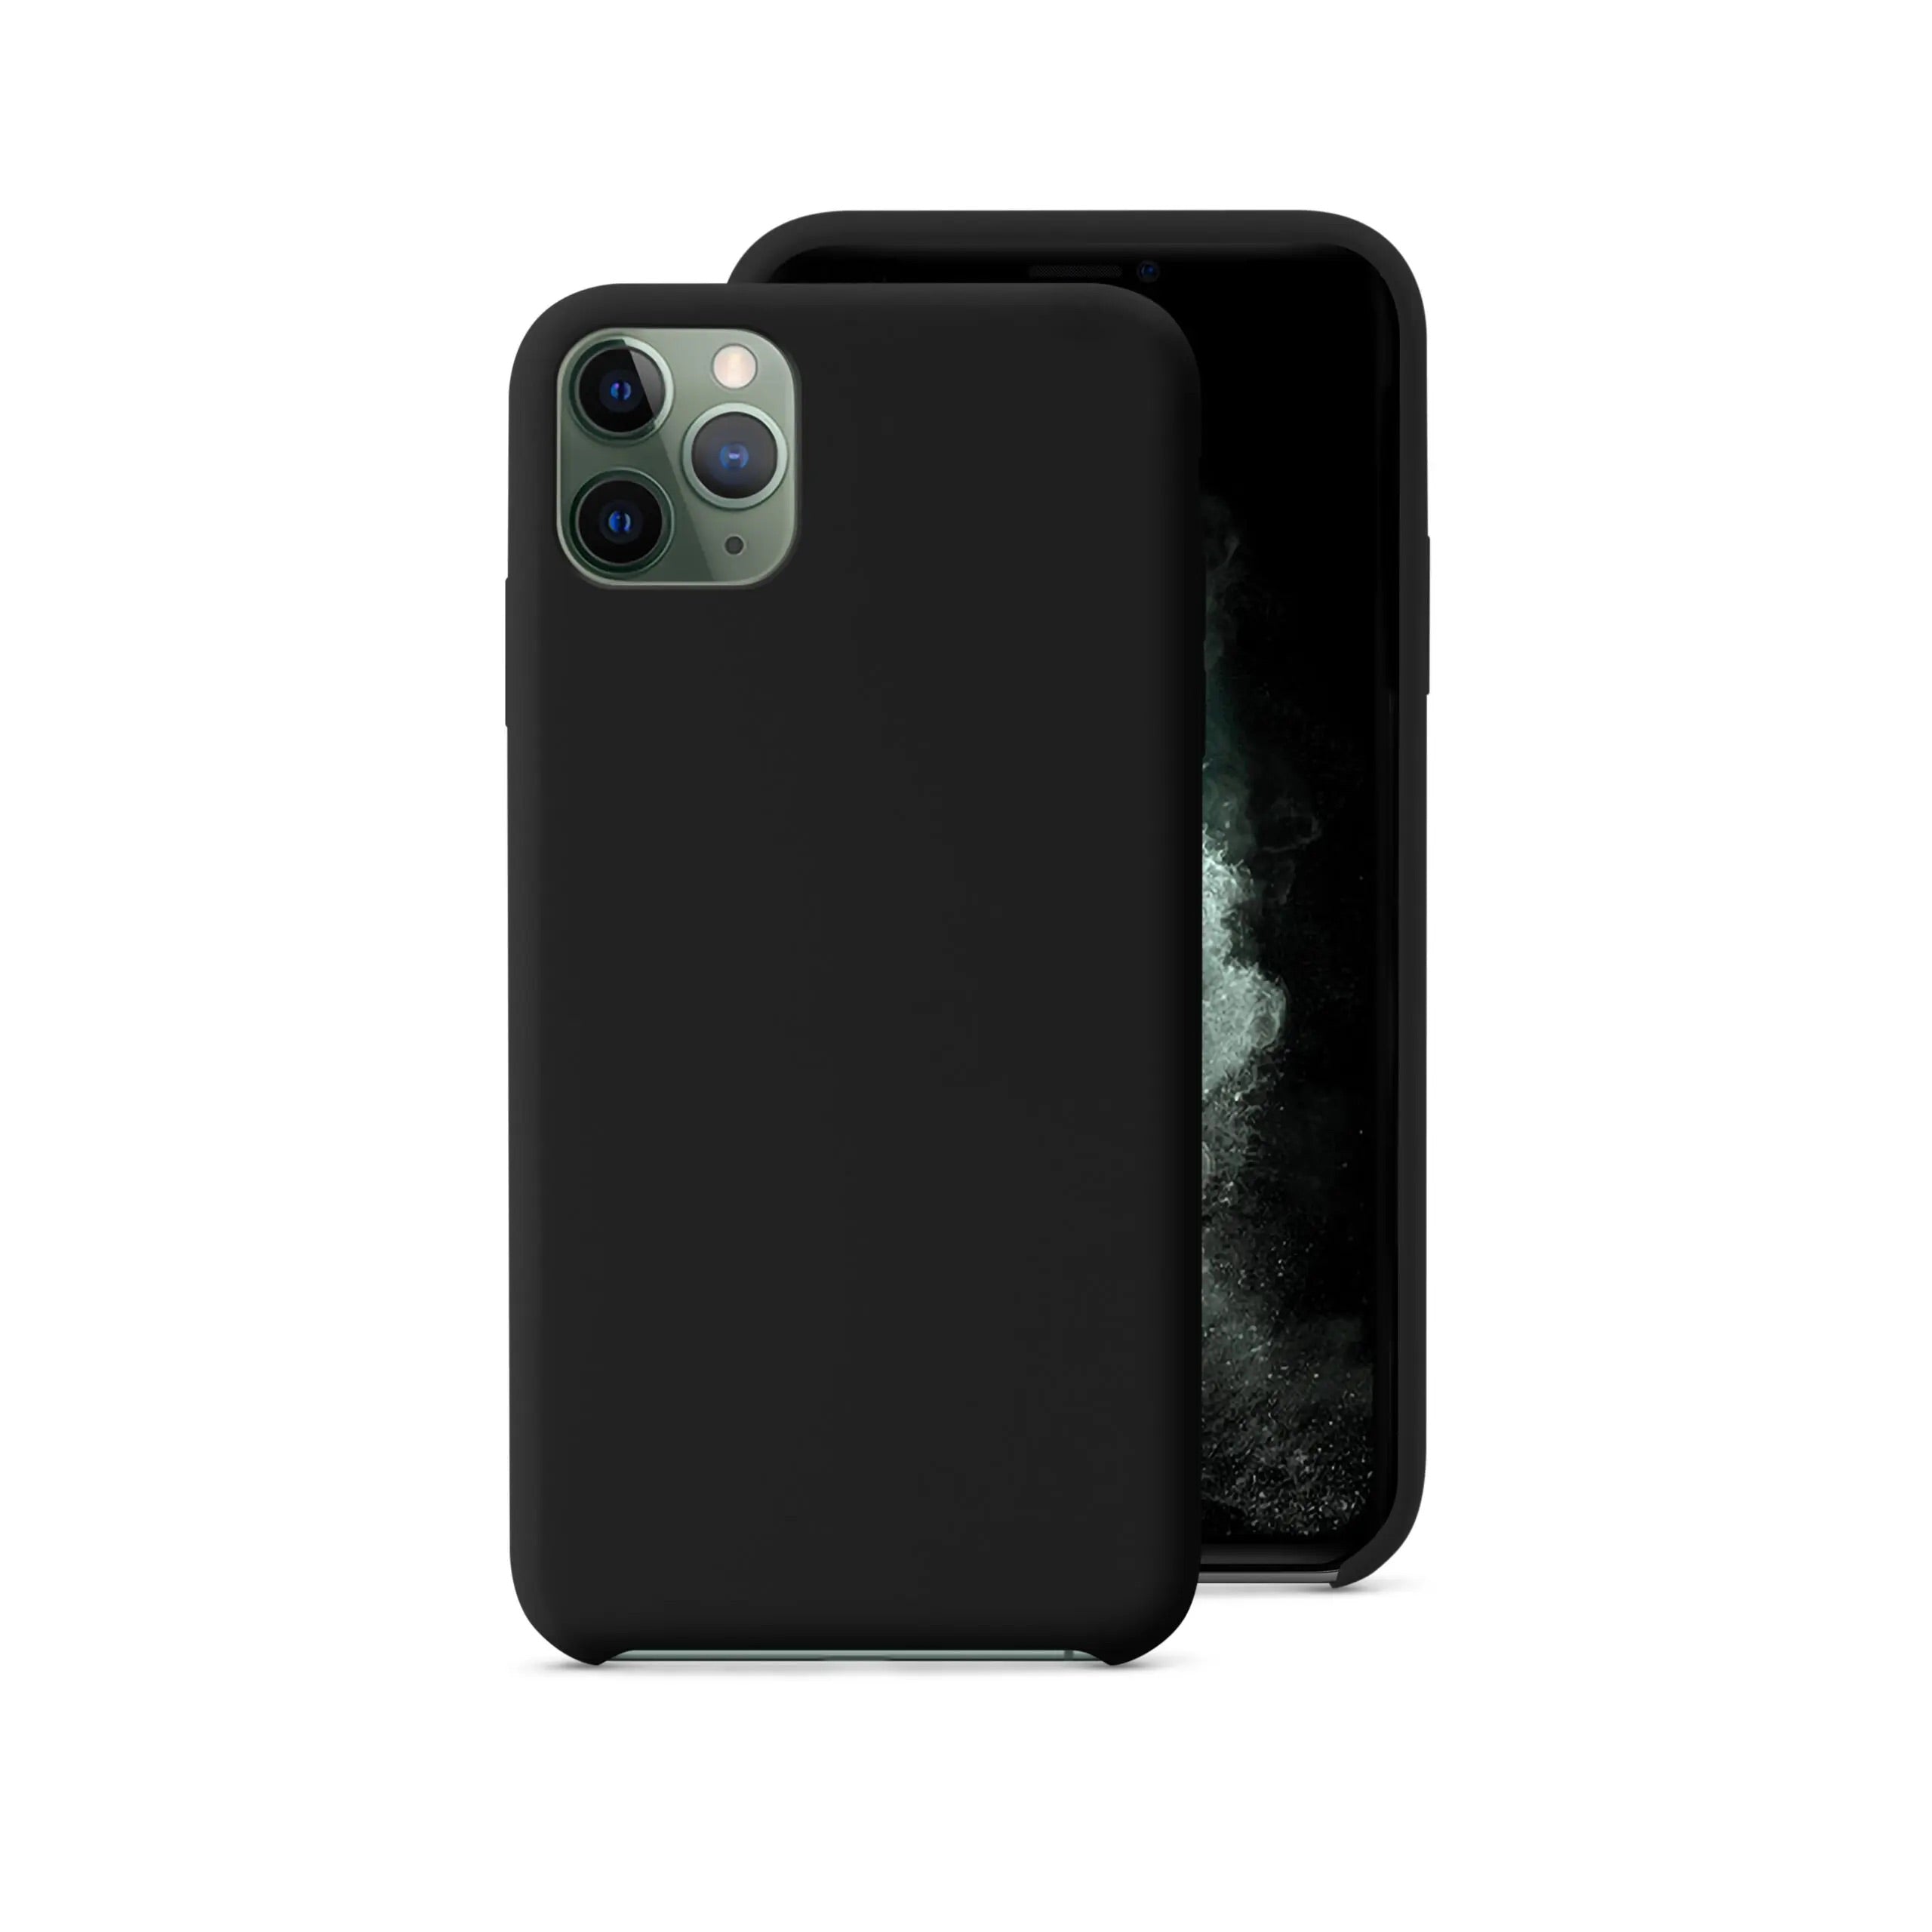 iPhone 11 Pro Max Silicone Case with Wireless charging Support